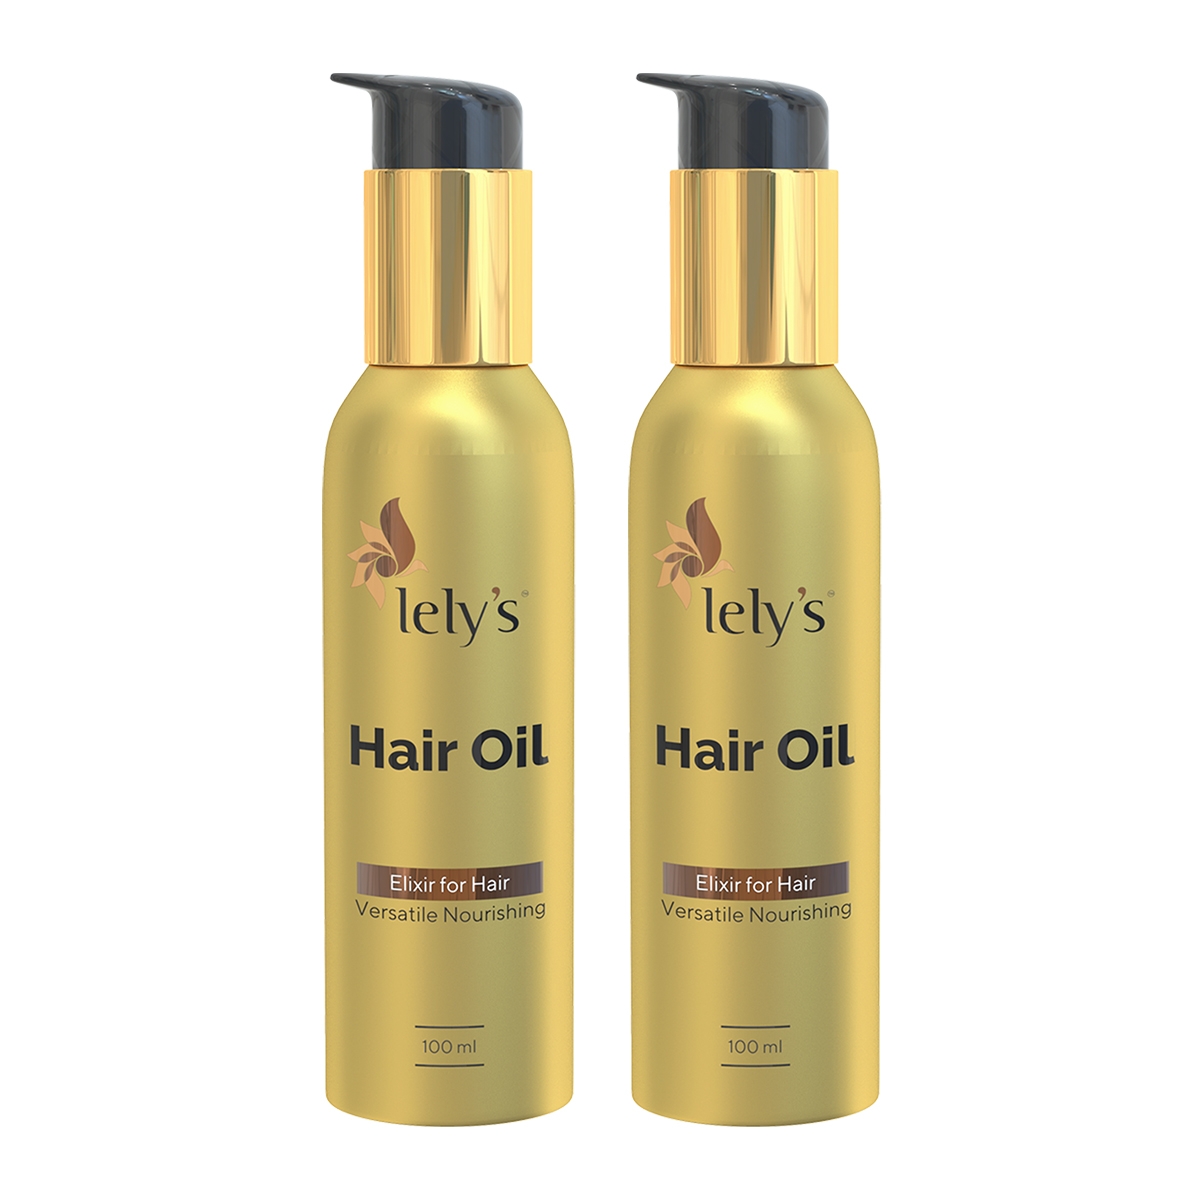 lely's | Lely’s Hair Oil For Hair Growth - Transforms Dry-Brittle Hair Into Silky, Reduces Hair Fall, Shiny And Smooth Hair, Soft And Firm Hair, Repairs Split Ends, Control Hair Damage - 100 Ml Pack of 2